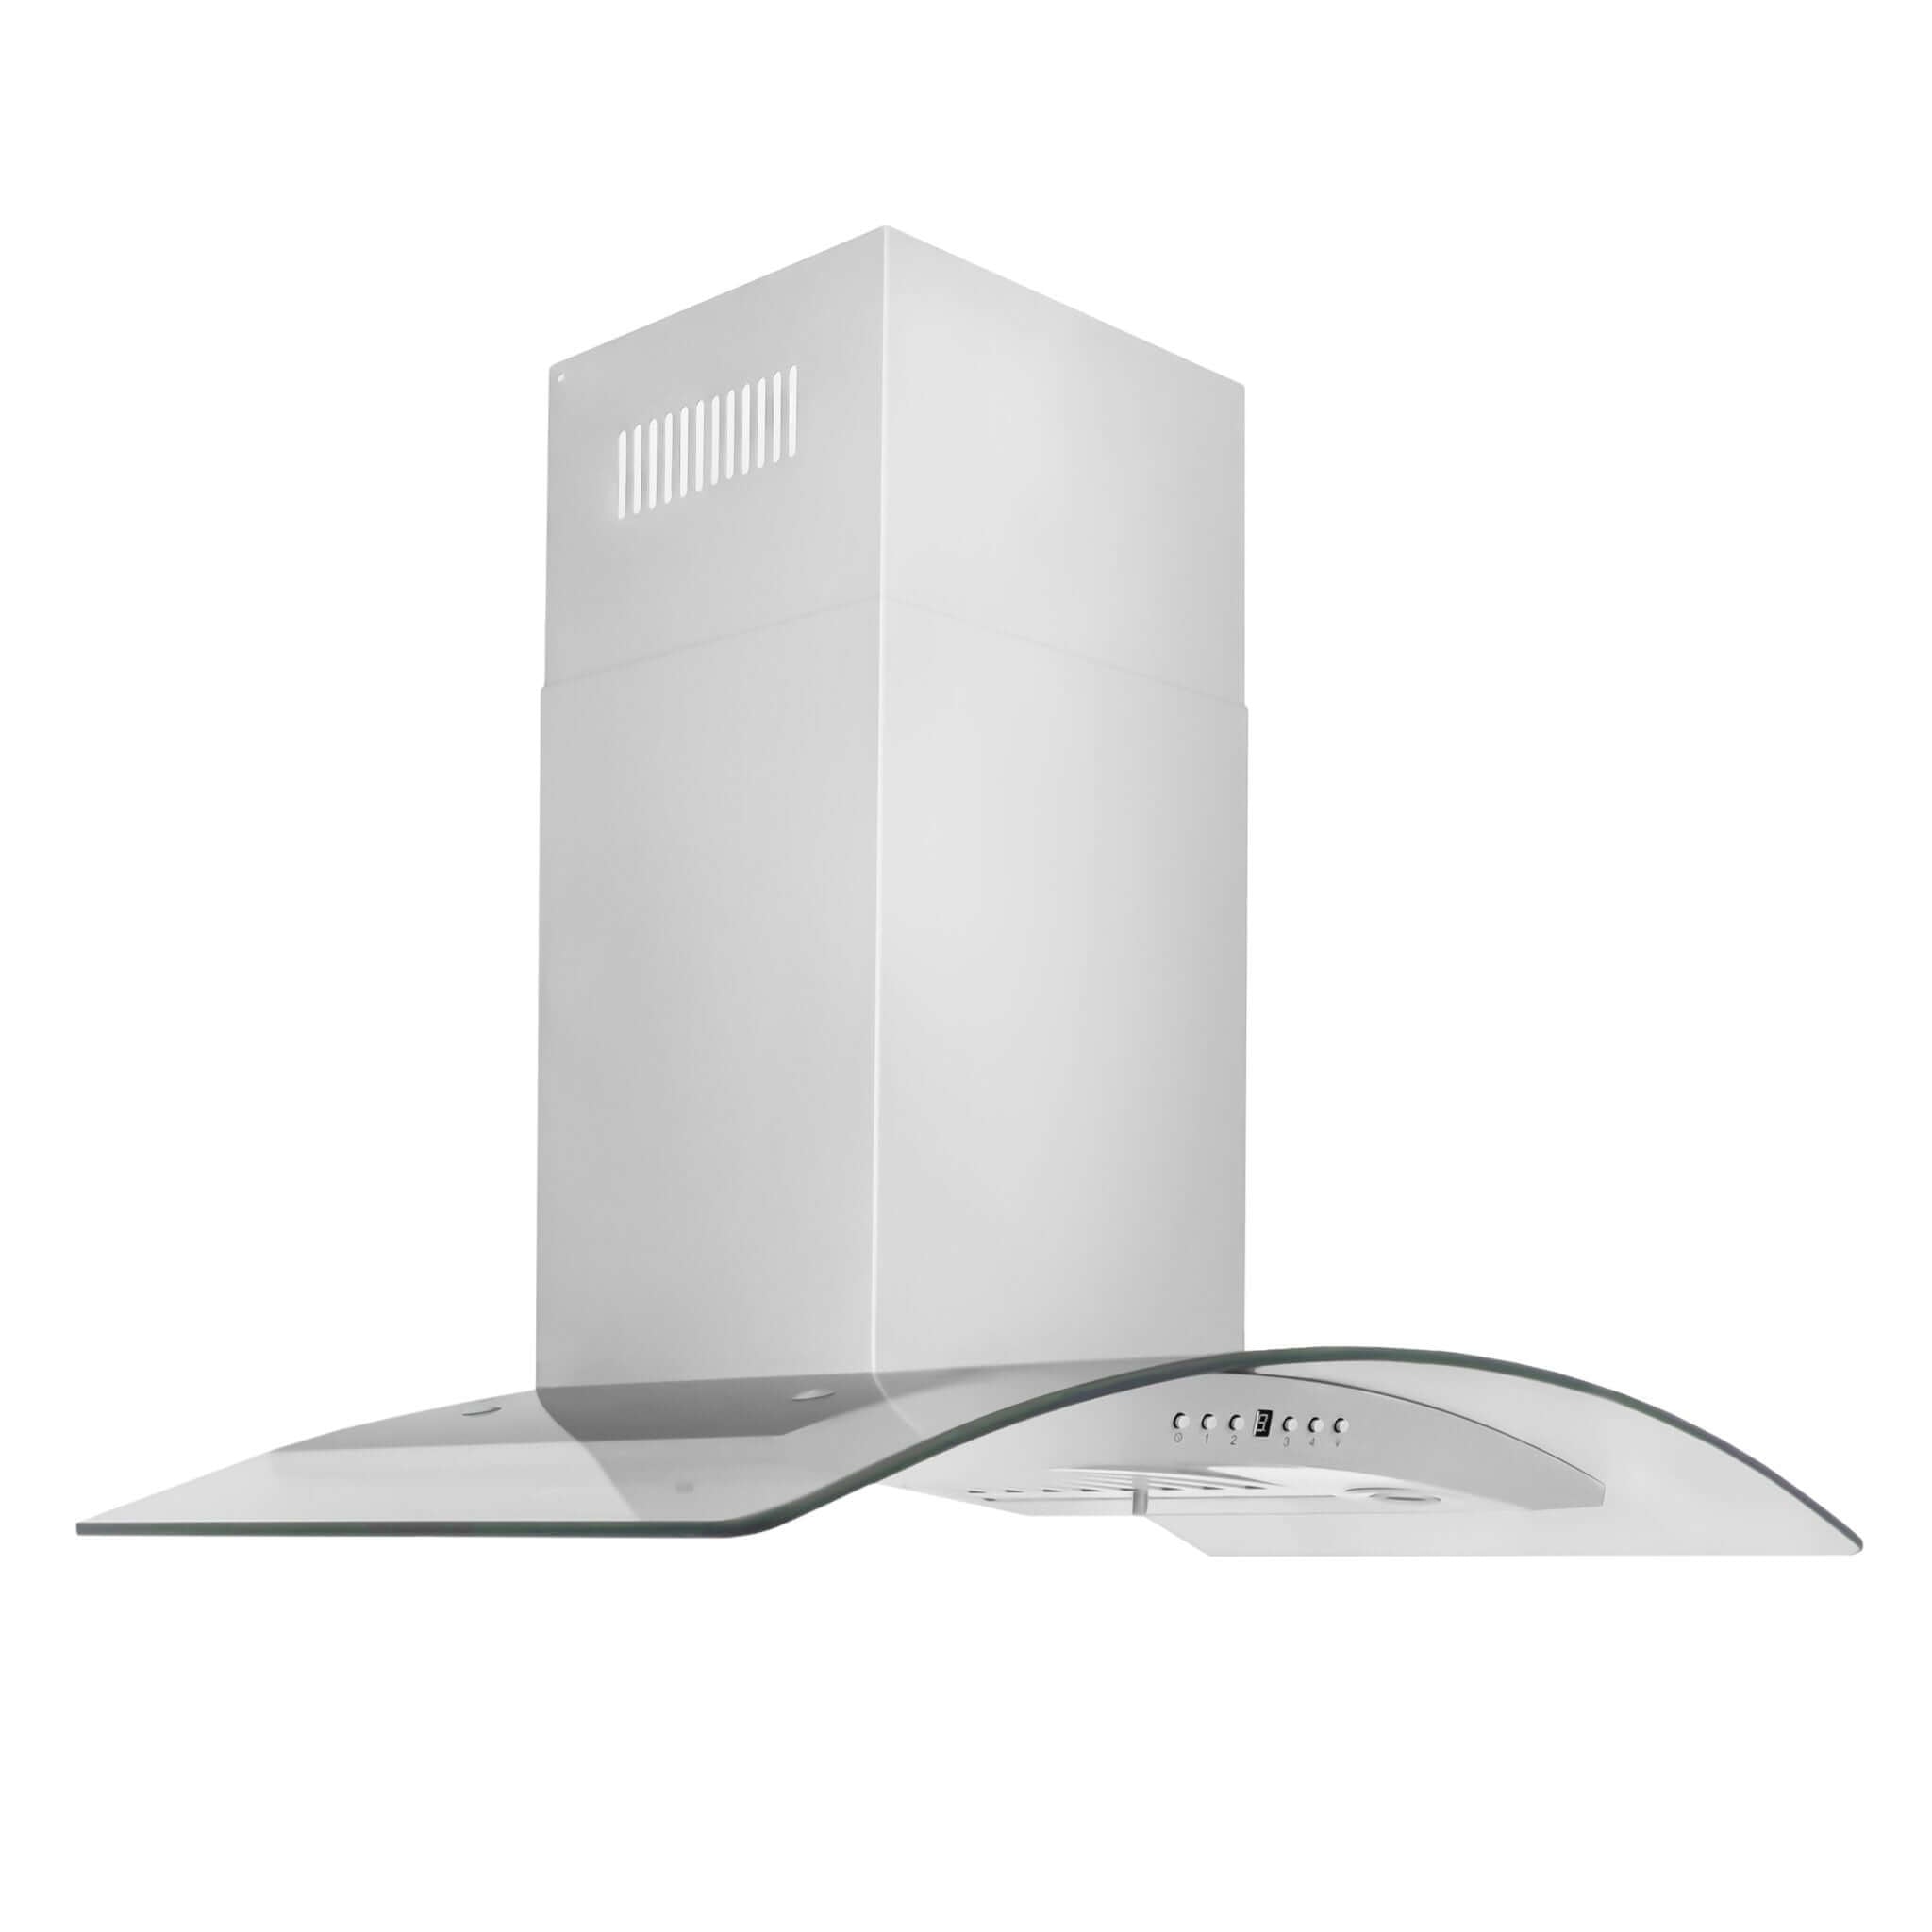 ZLINE Convertible Vent Wall Mount Range Hood in Stainless Steel & Glass (KN4) Available in 30 Inch, 36 Inch, and 48 Inch Sizes